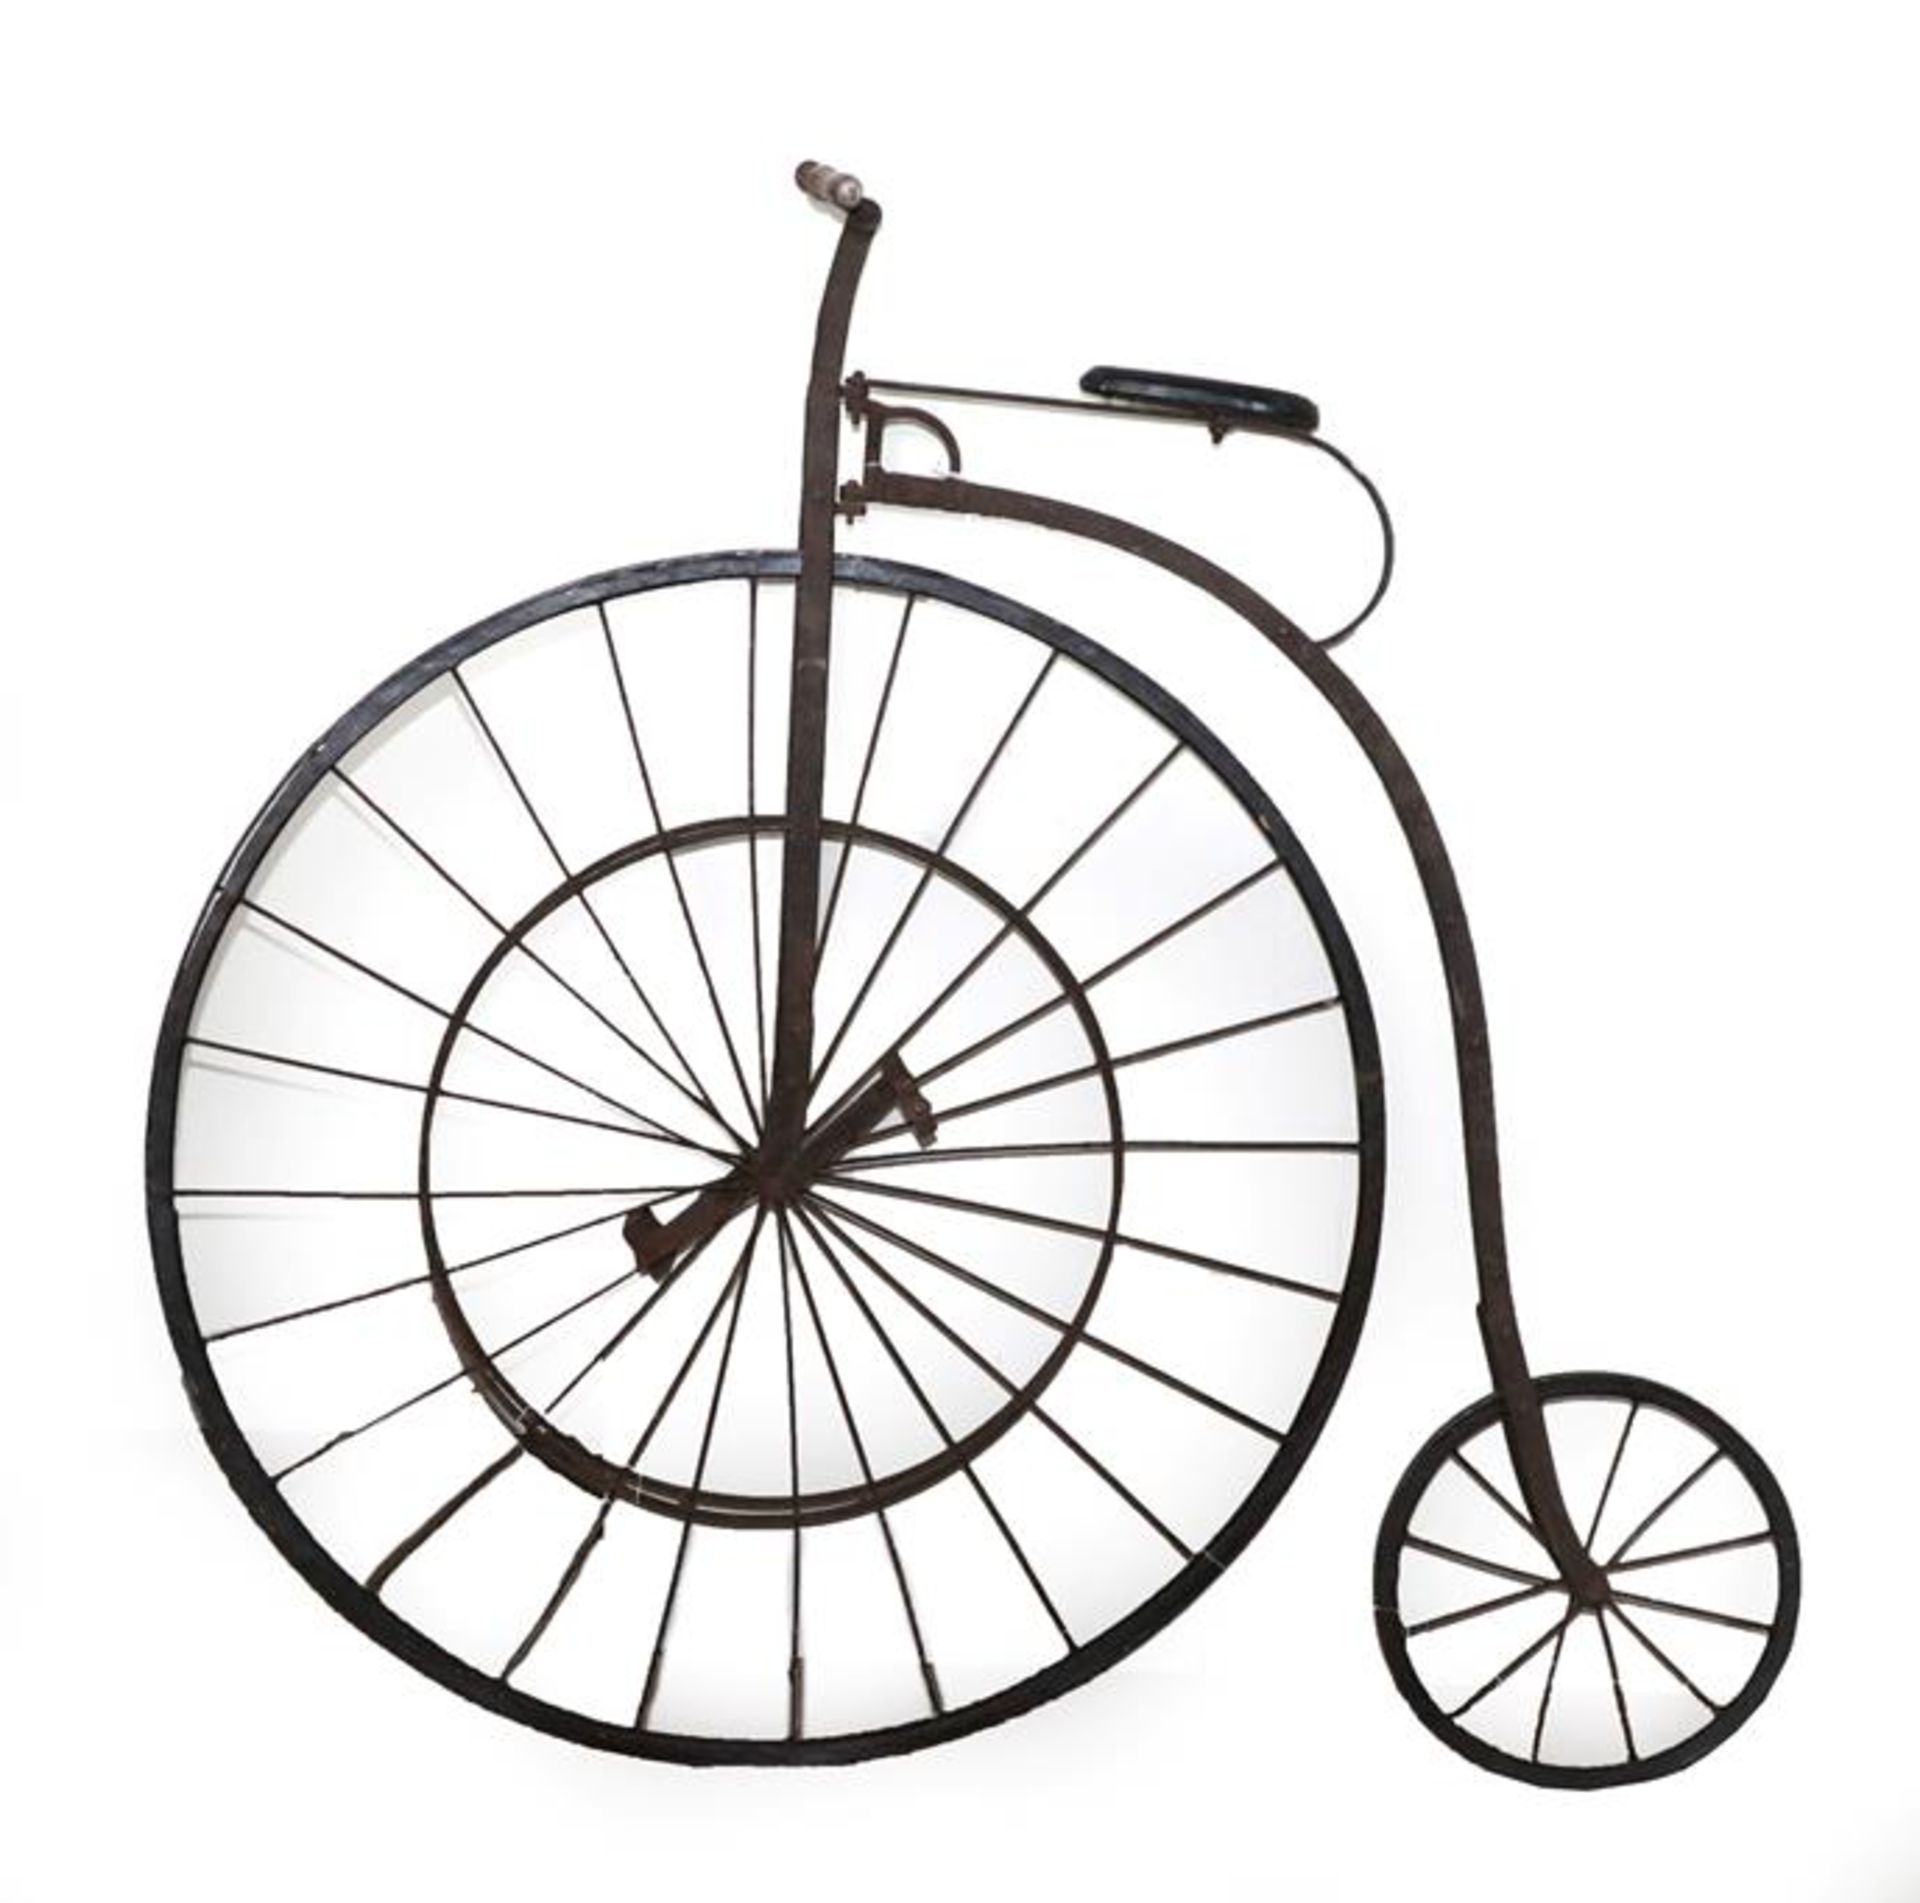 A Penny Farthing or Penny Ordinary Bicycle, with spoked and solid wheels, the shaped handle bars